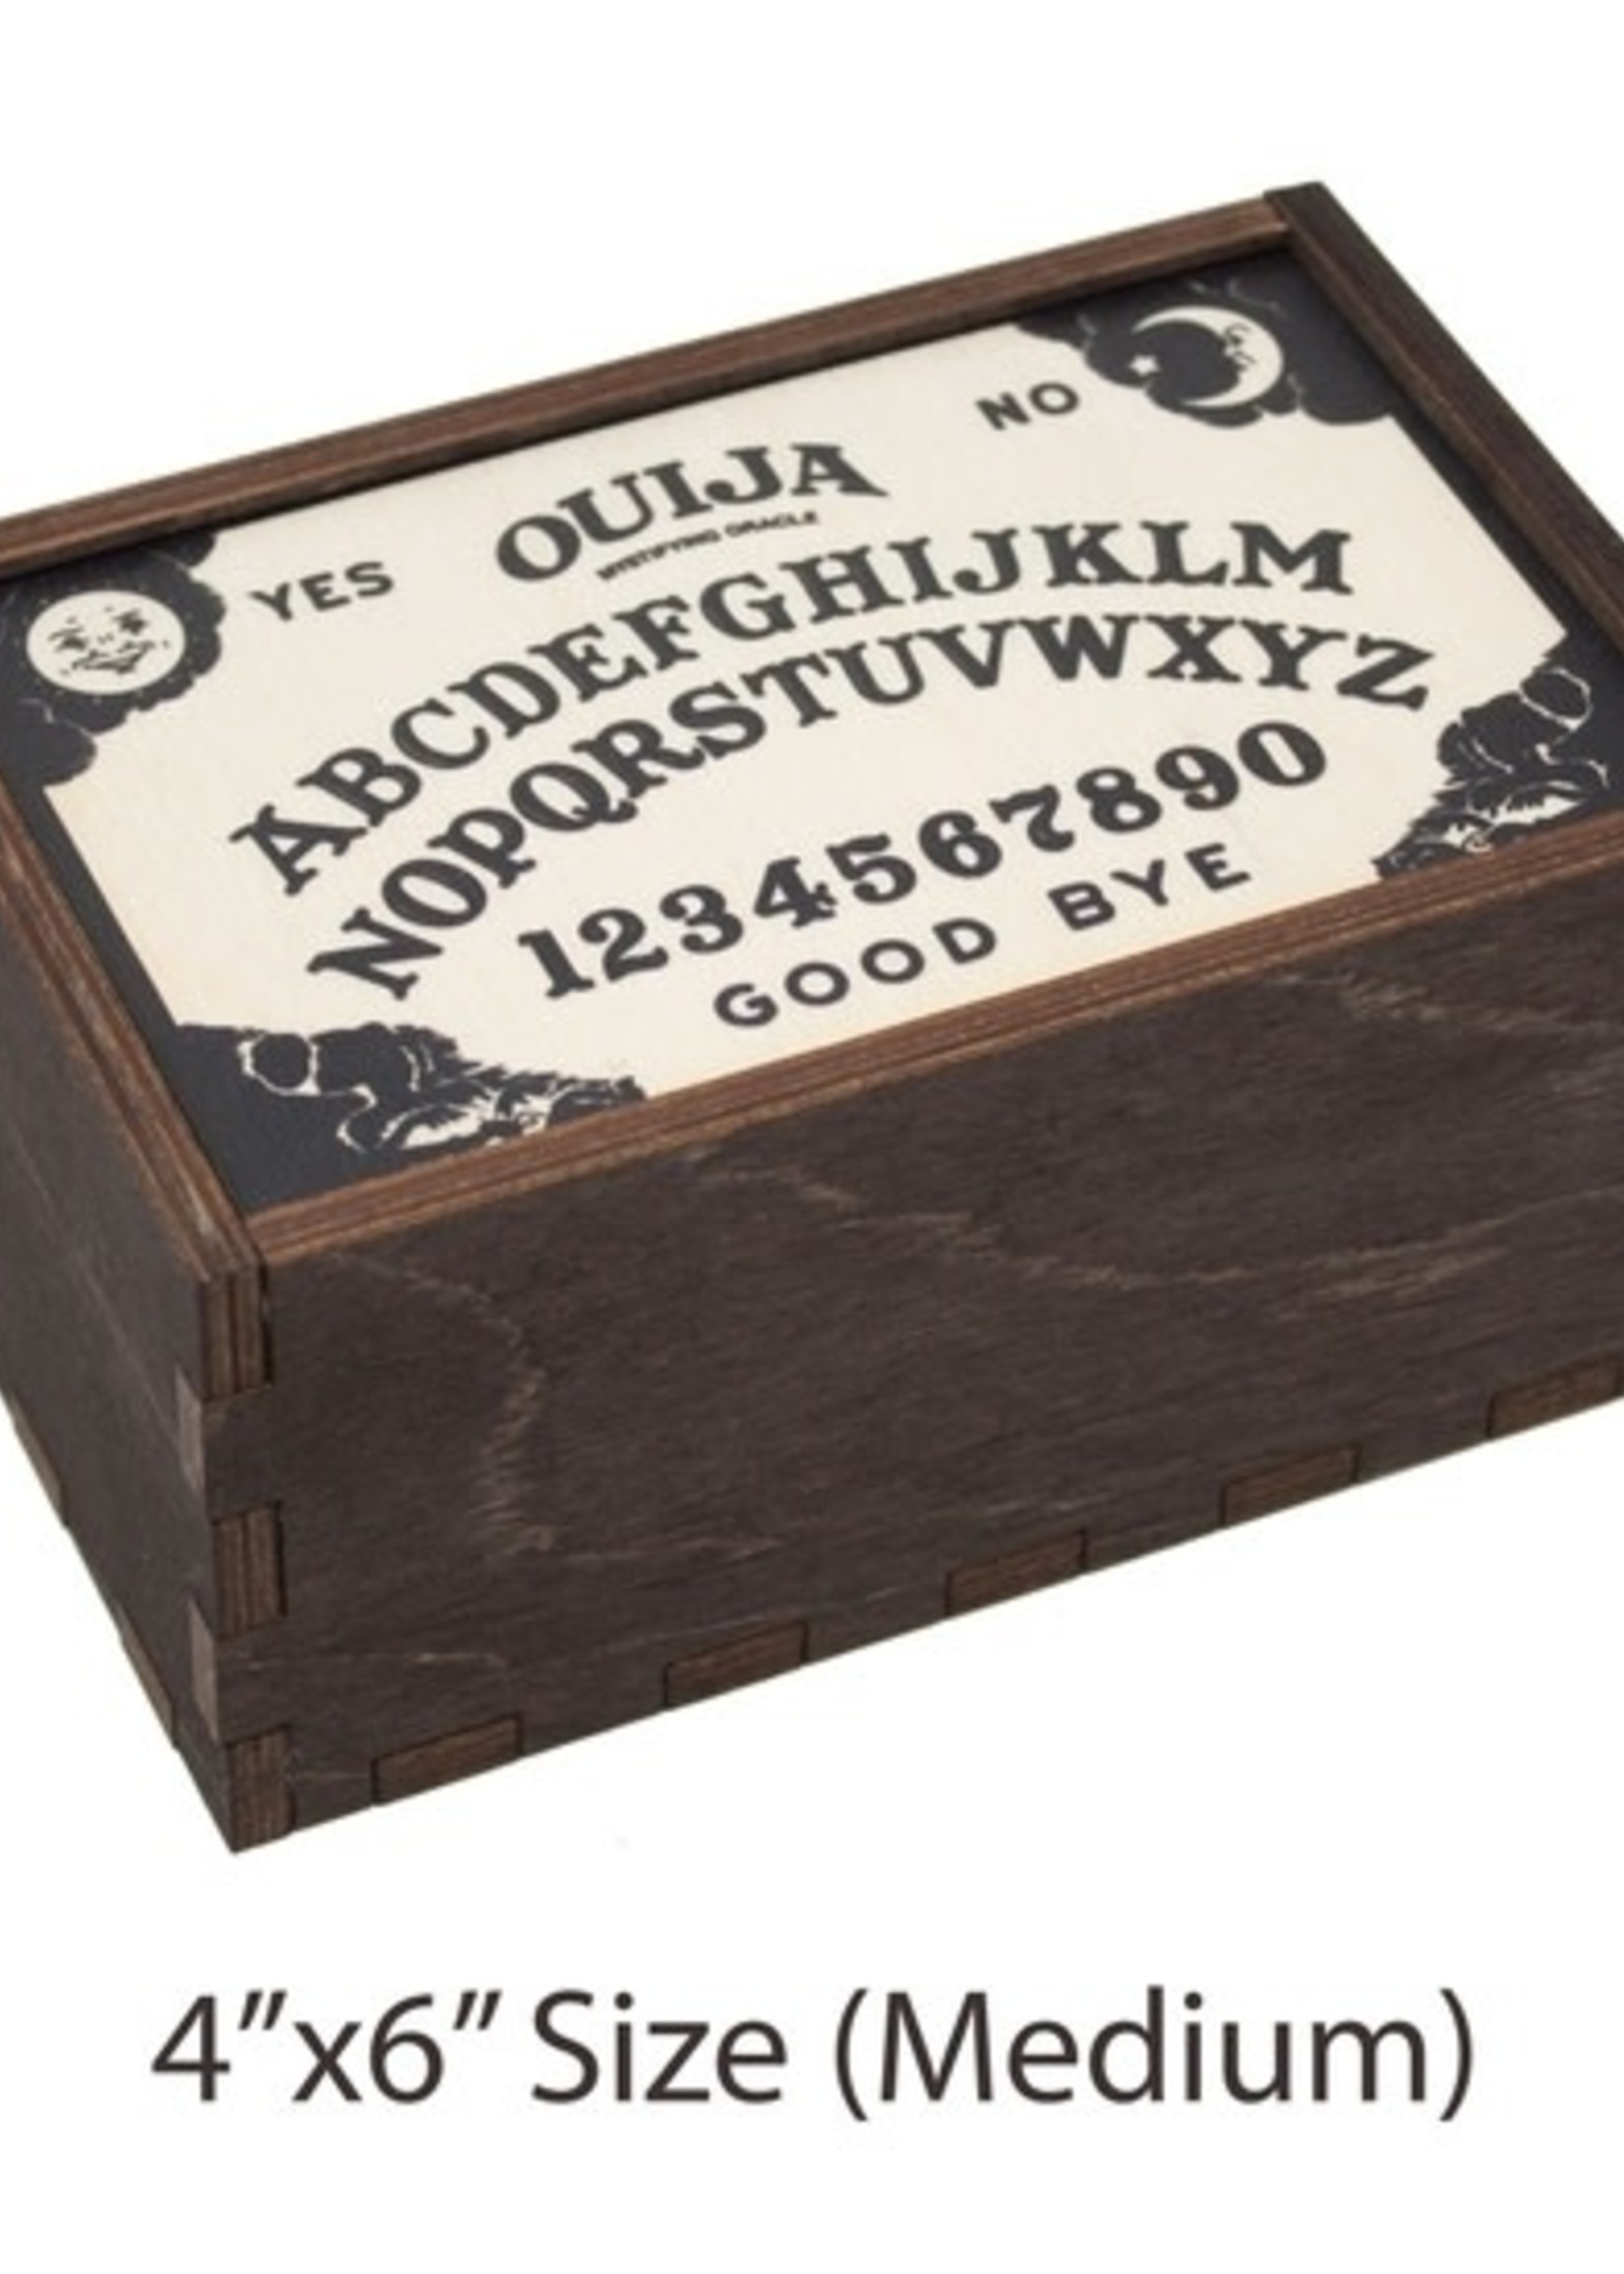 Most Amazing Boxes: Ouija Board 4x6